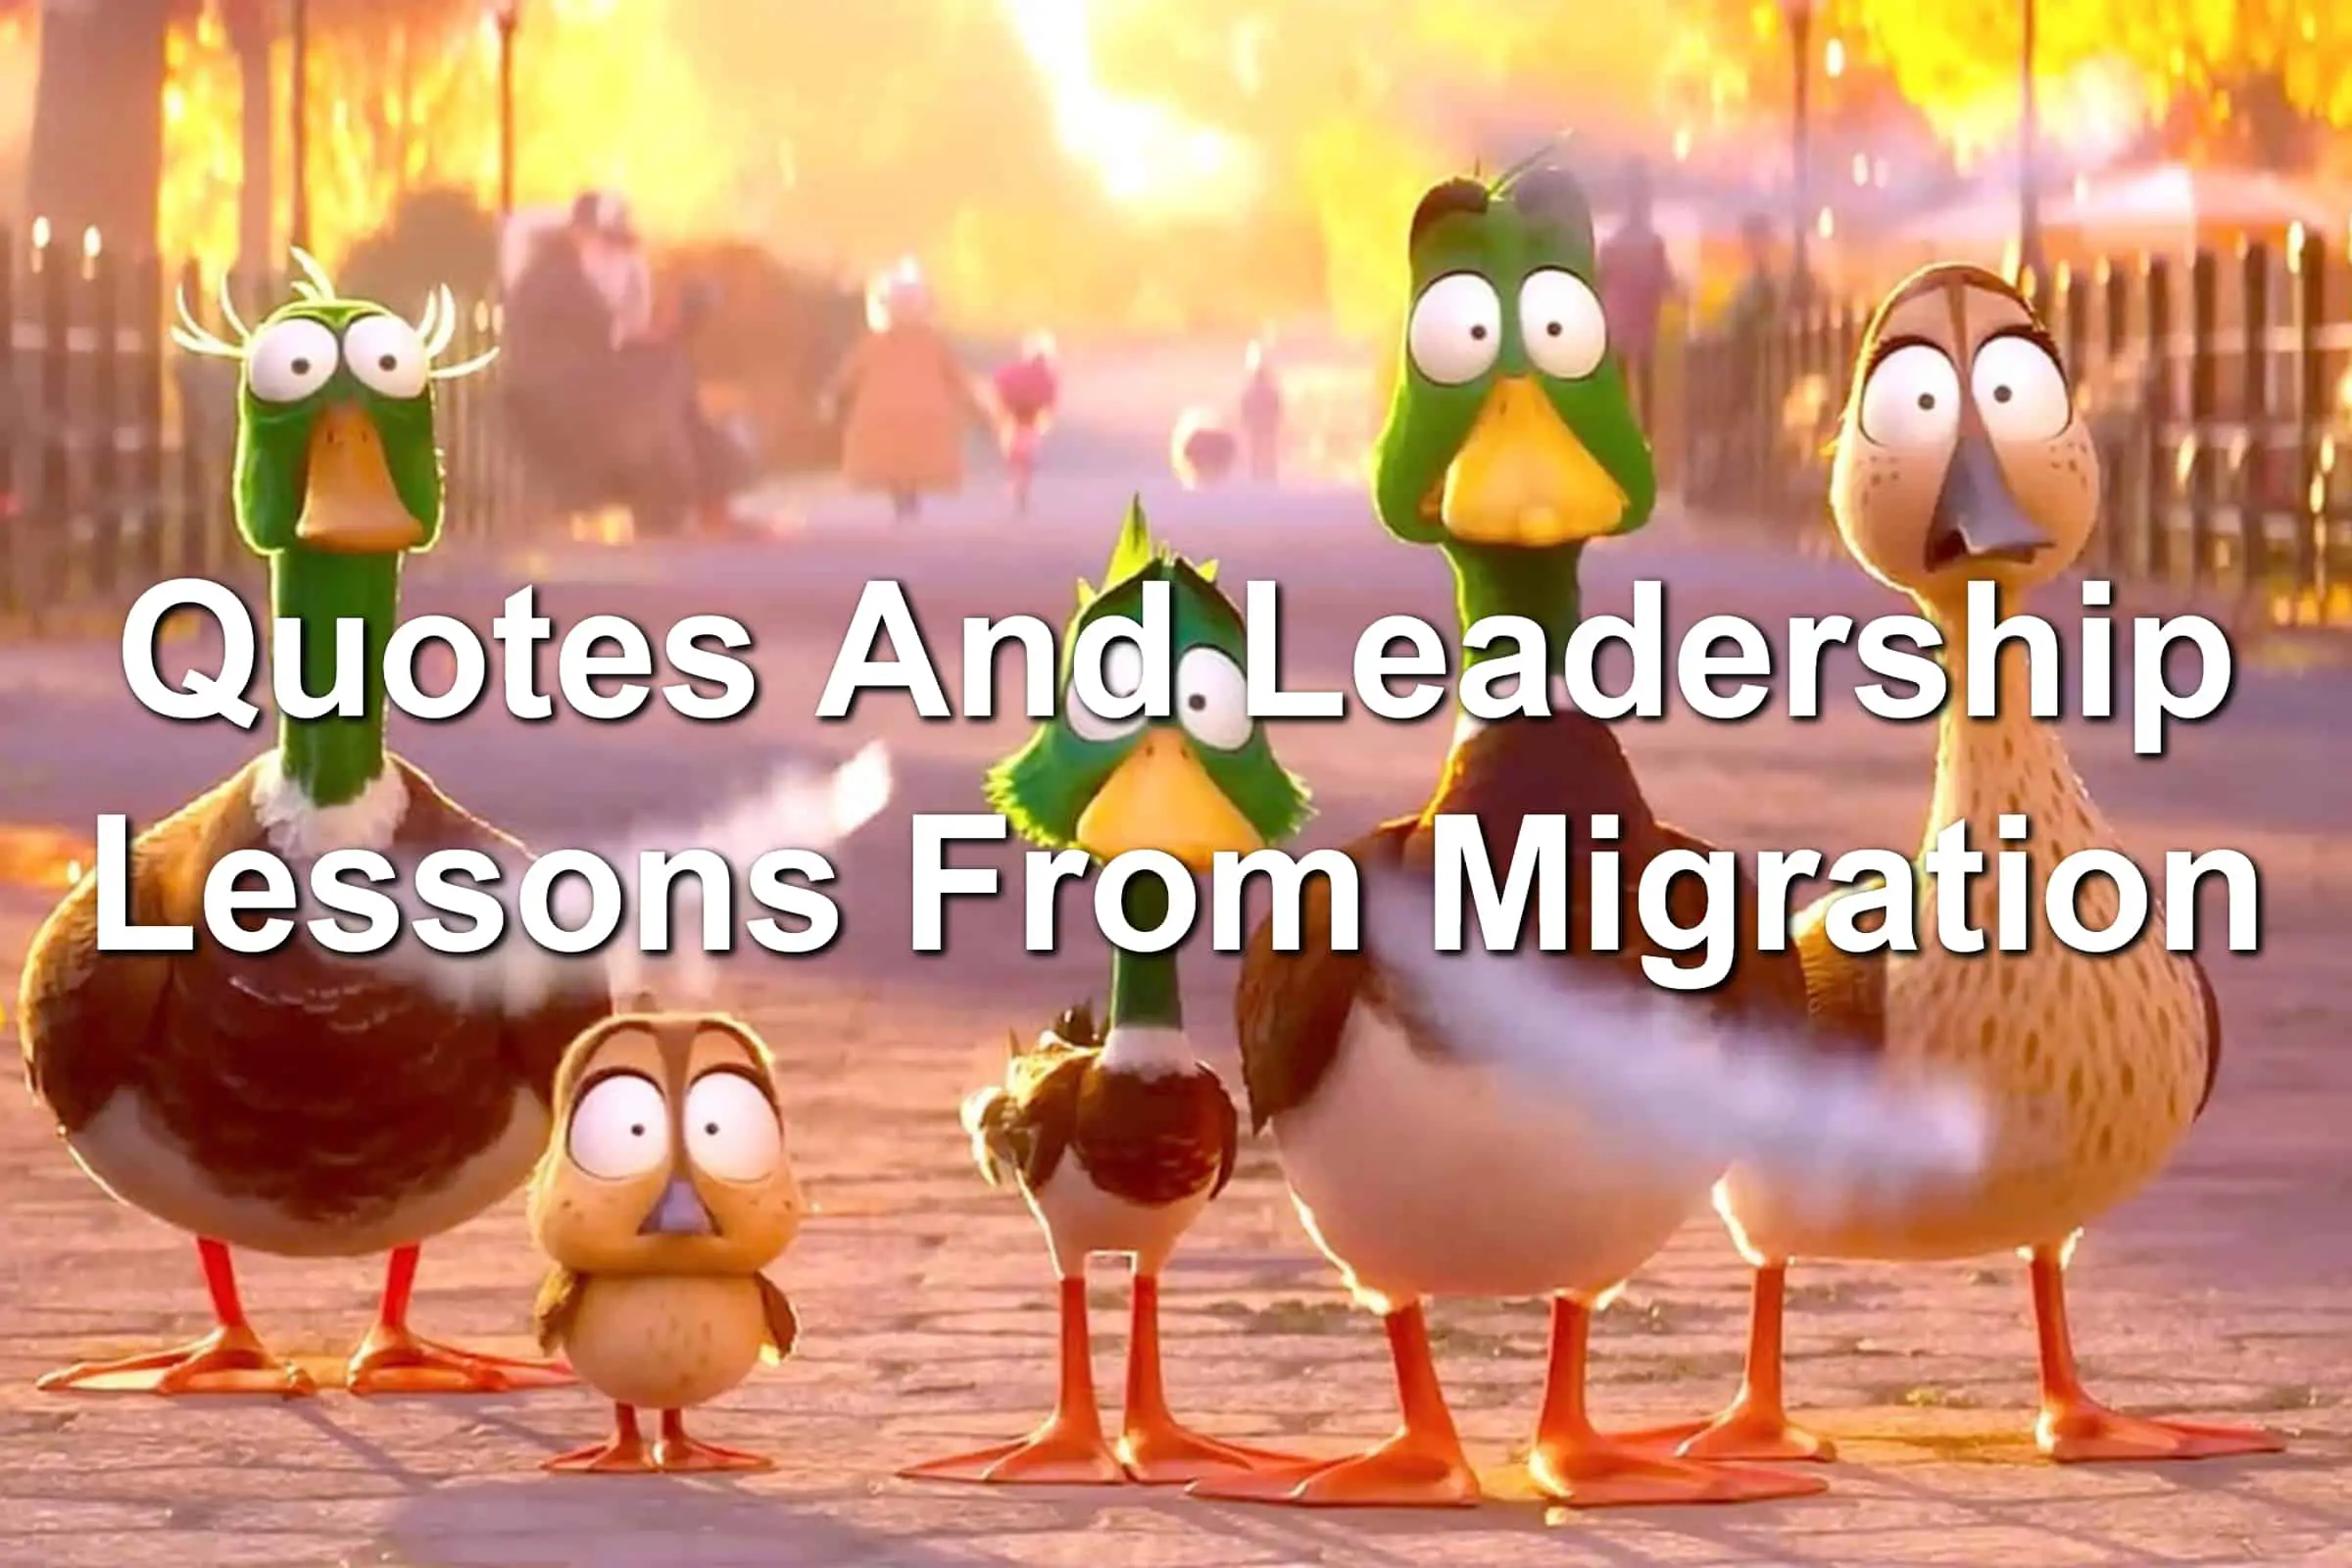 4 animated ducks standing on a sidewalk. Pigeon feathers are floating in the air.